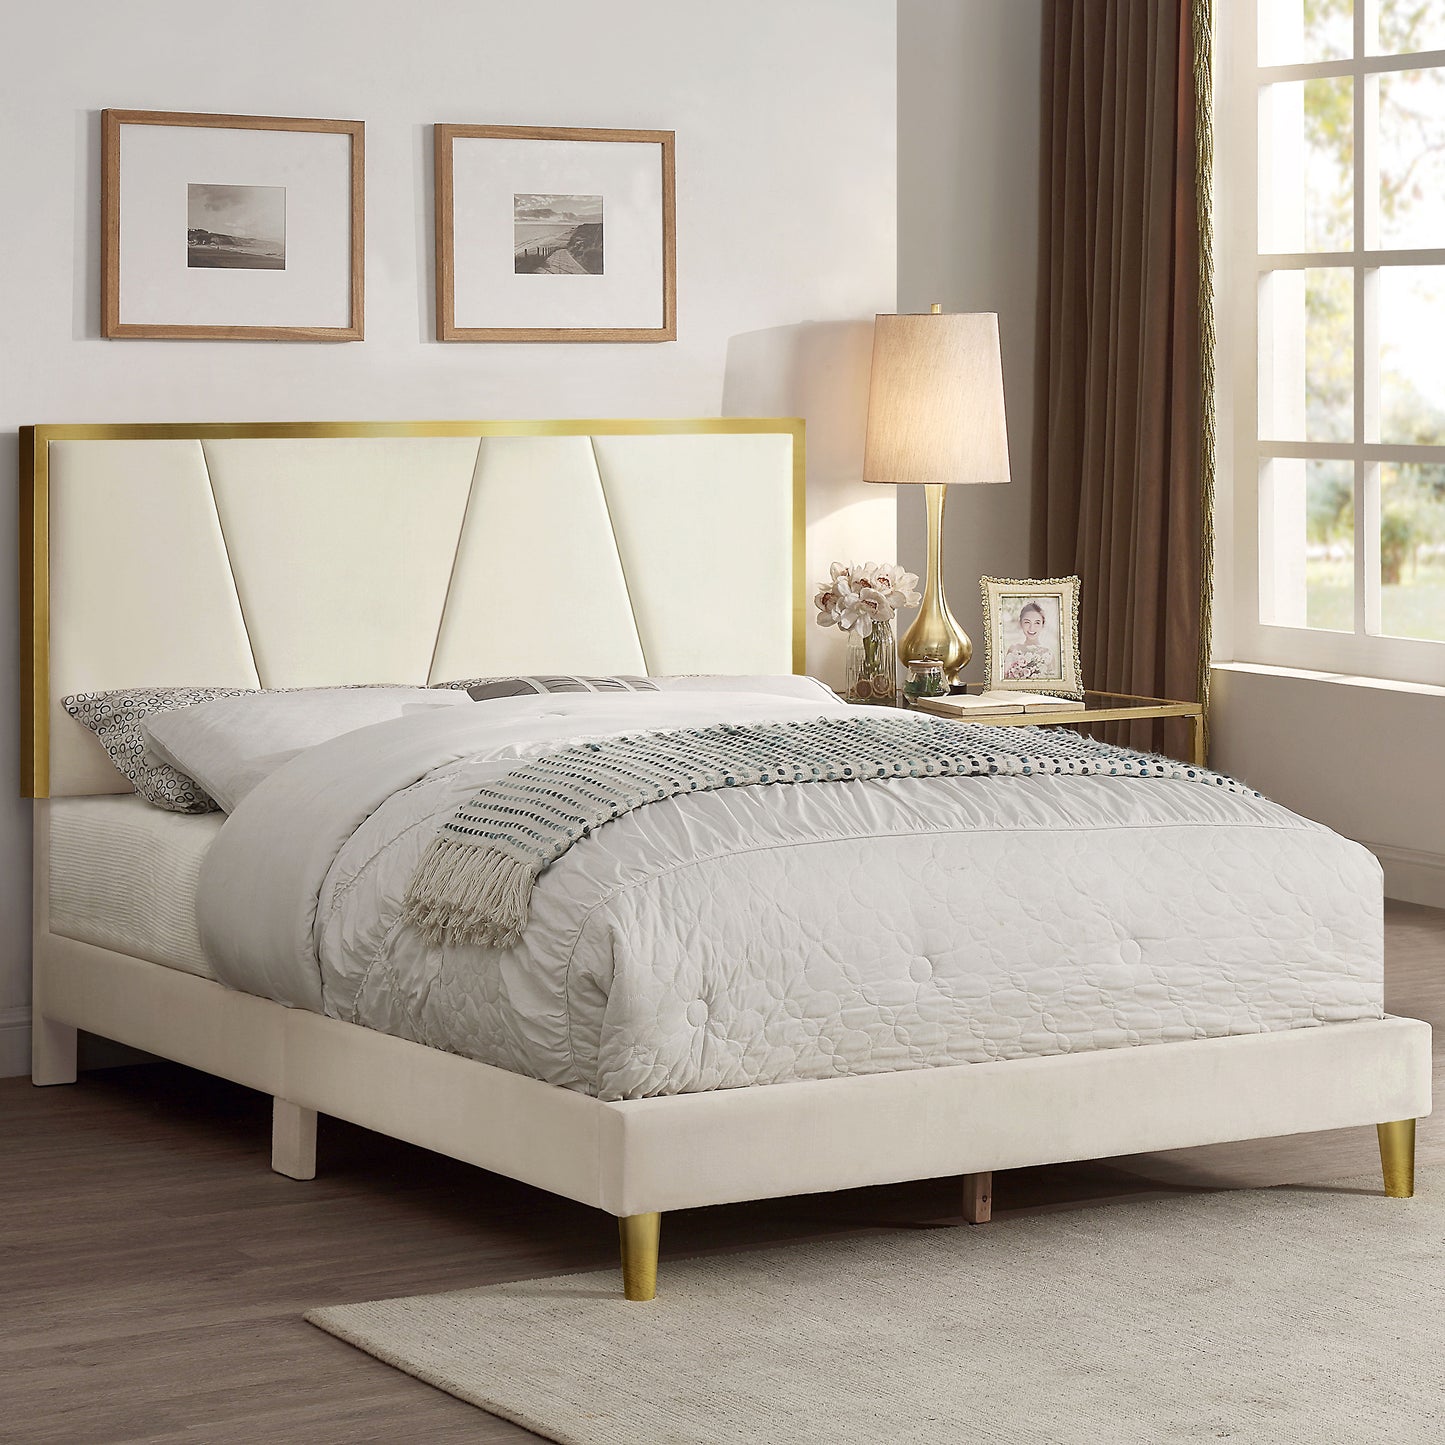 Right angled contemporary beige and gold upholstered queen bed in a bedroom with accessories